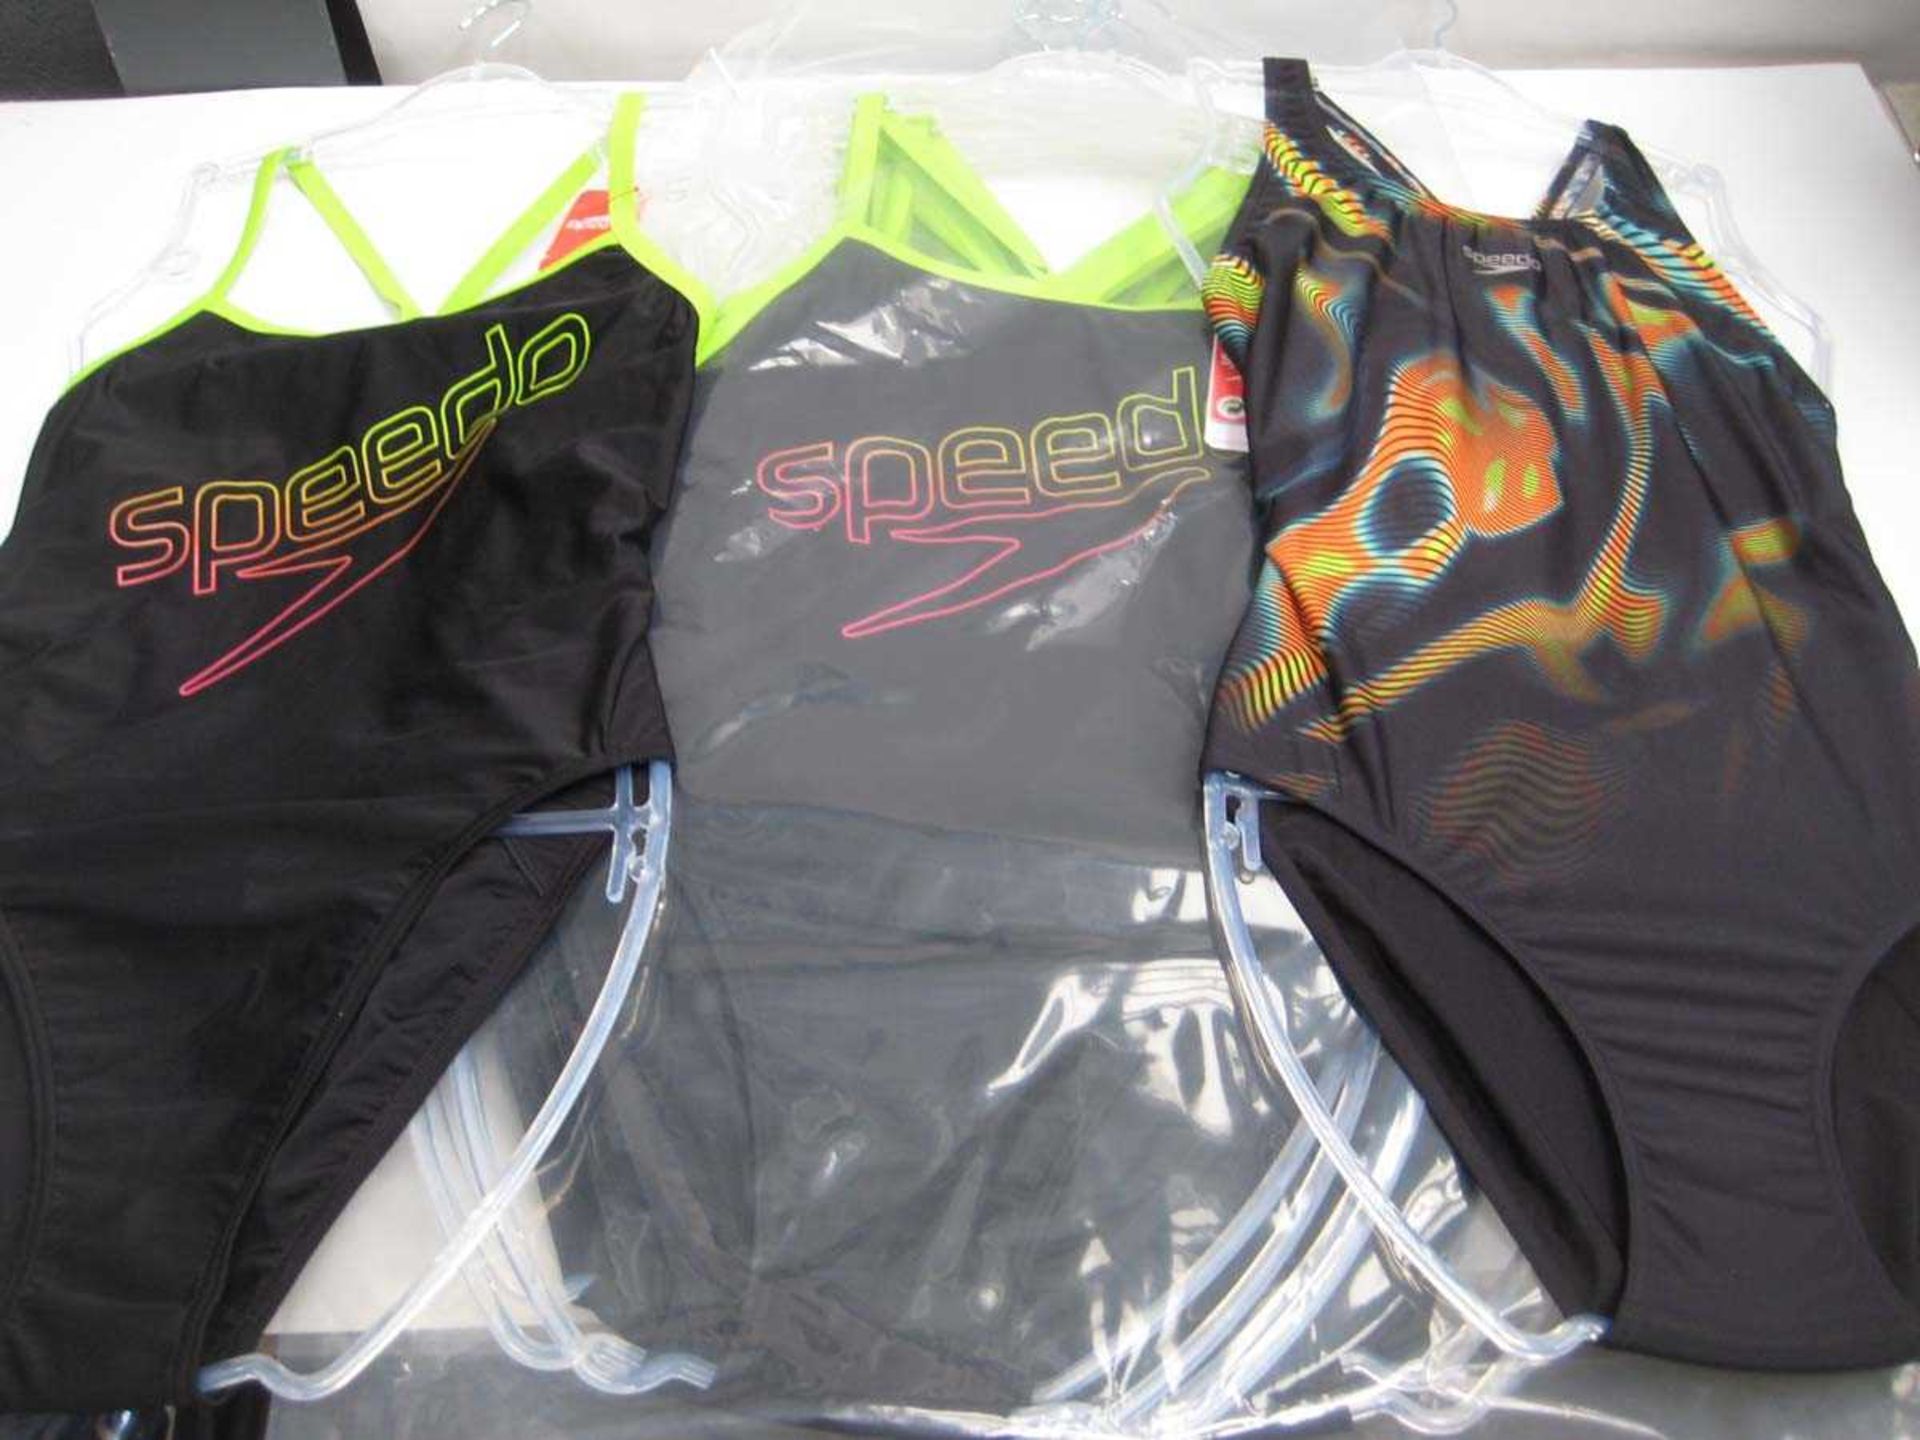 +VAT A bag containing 10x Ladies Speedo Swimming Costumes in various styles and sizes